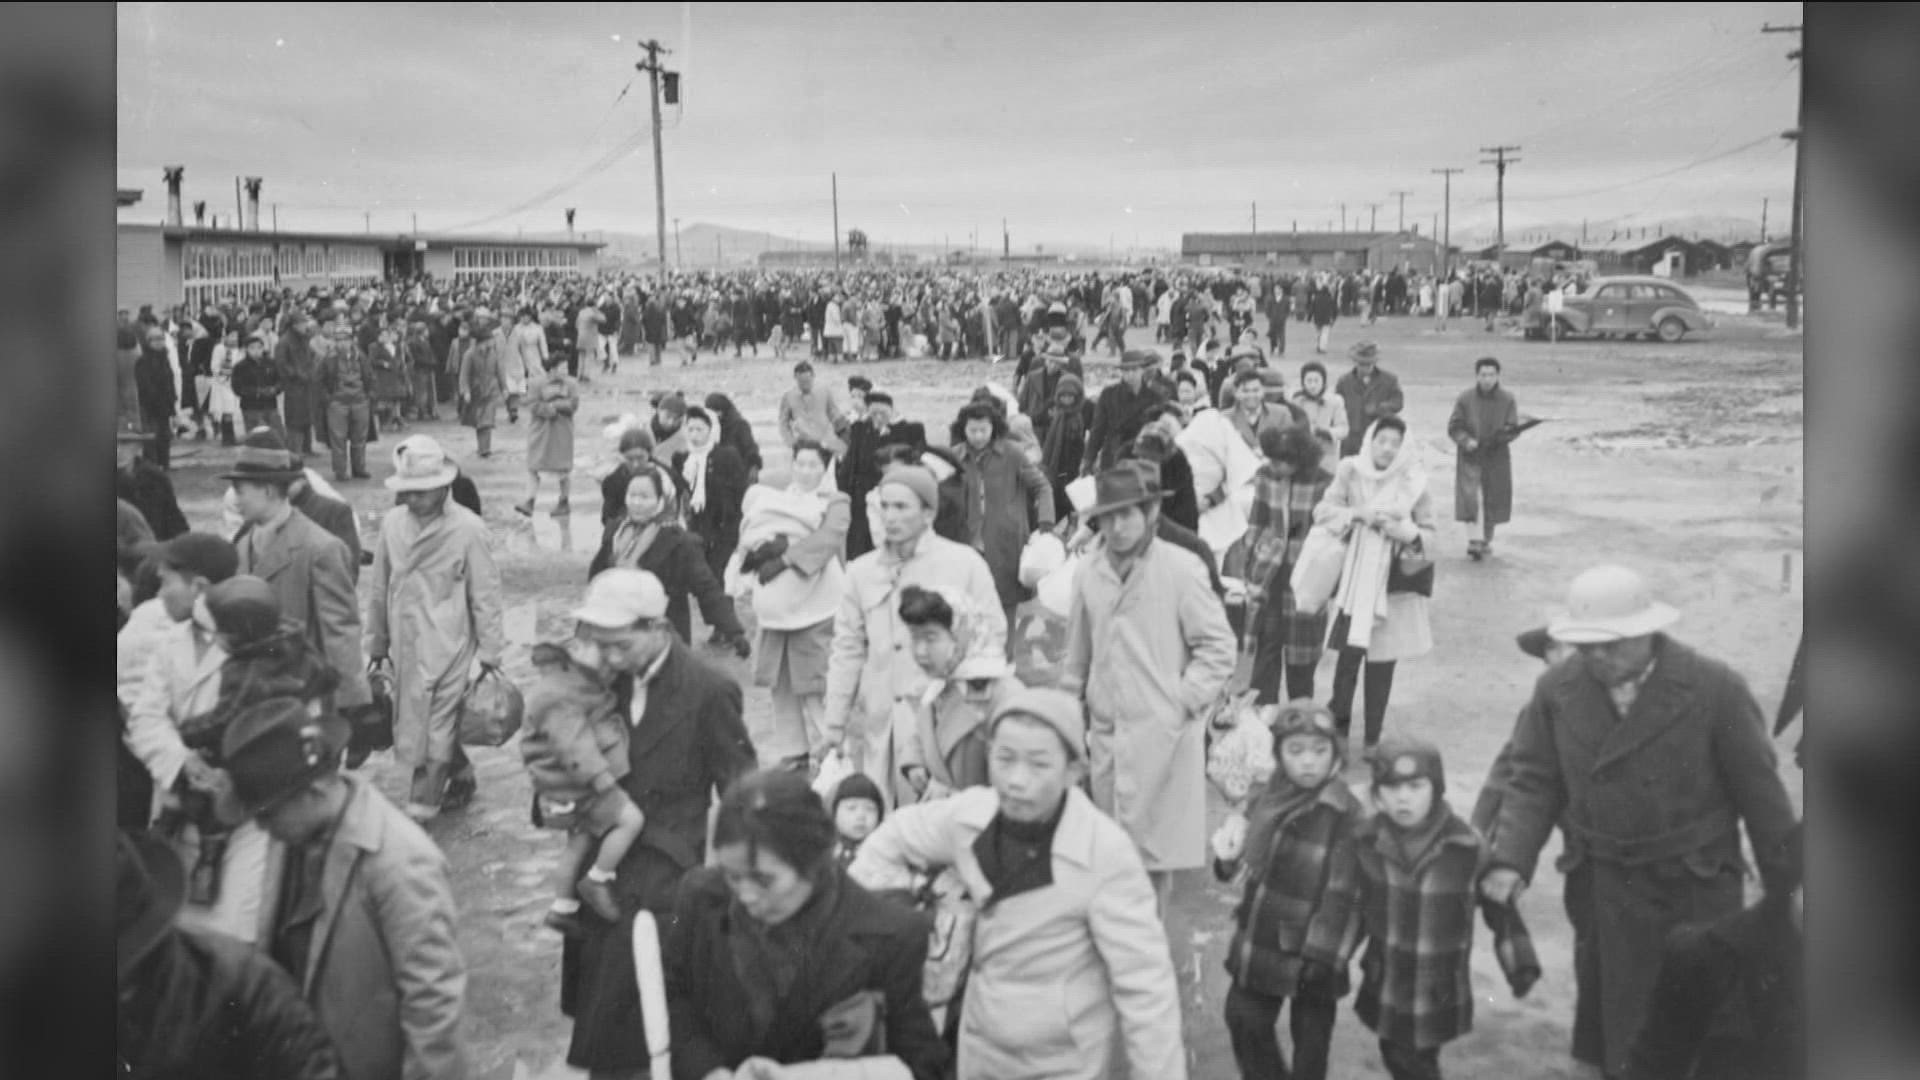 Executive Order 9066 created 10 incarceration camps, one of those was in Idaho. The Minidoka War Relocation Center held over 13,000 Japanese-Americans during WWII.